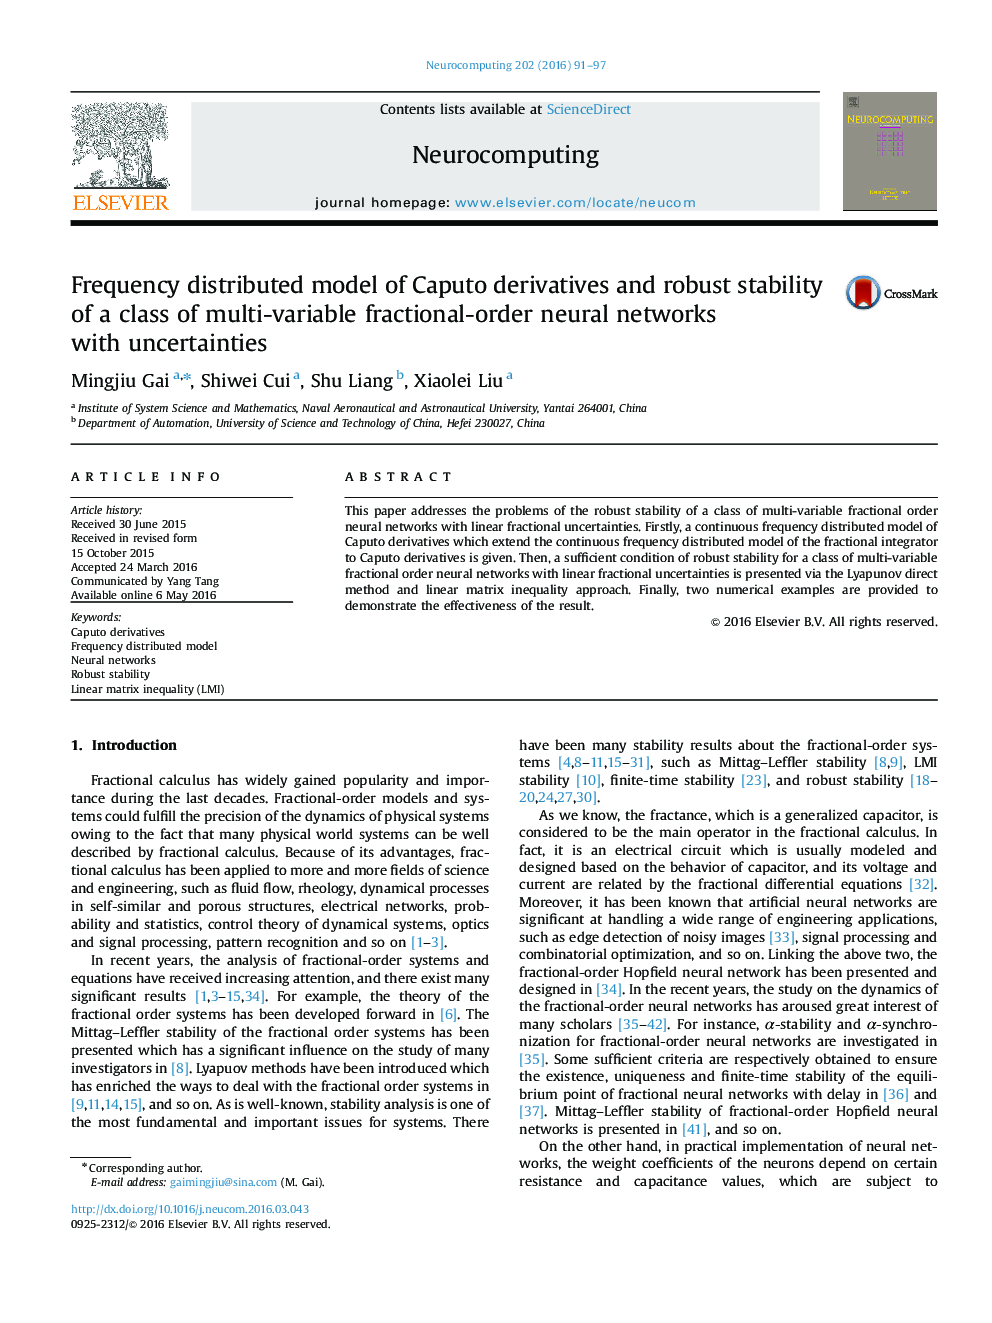 Frequency distributed model of Caputo derivatives and robust stability of a class of multi-variable fractional-order neural networks with uncertainties